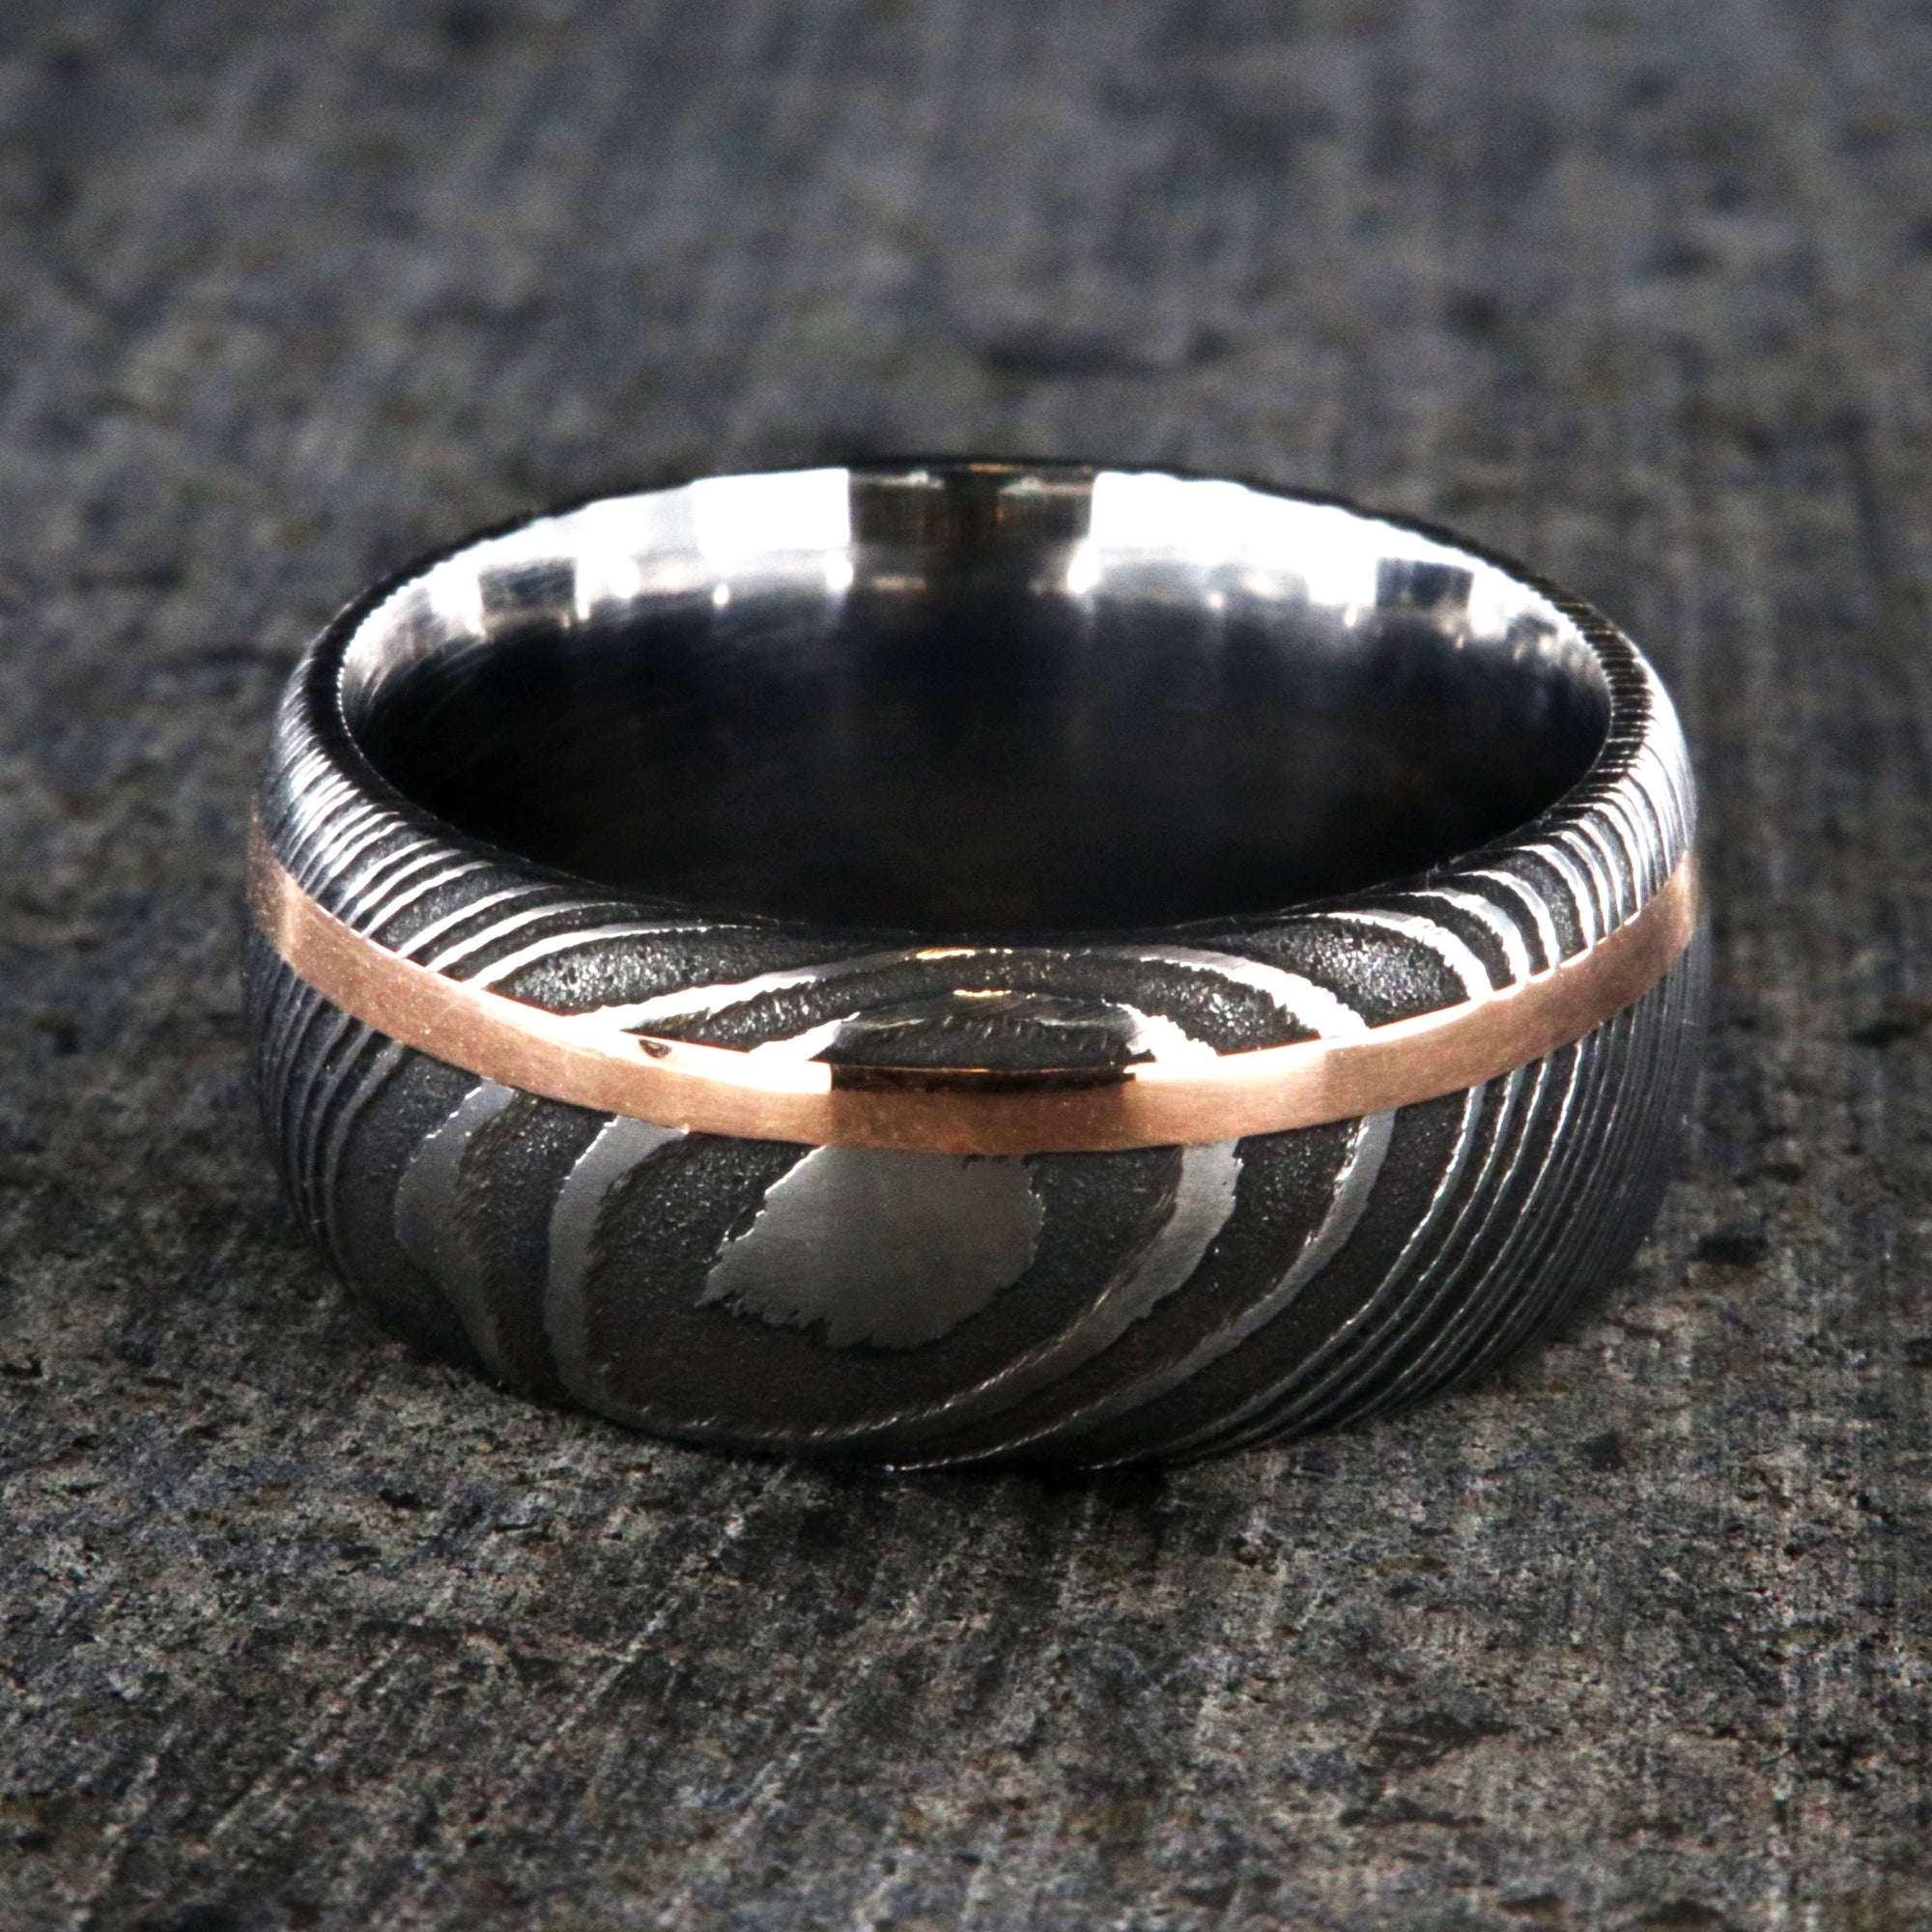 10mm wide black Damascus steel wedding band for men with two-tone pattern, an off-center rose gold inlay, and a polished inside